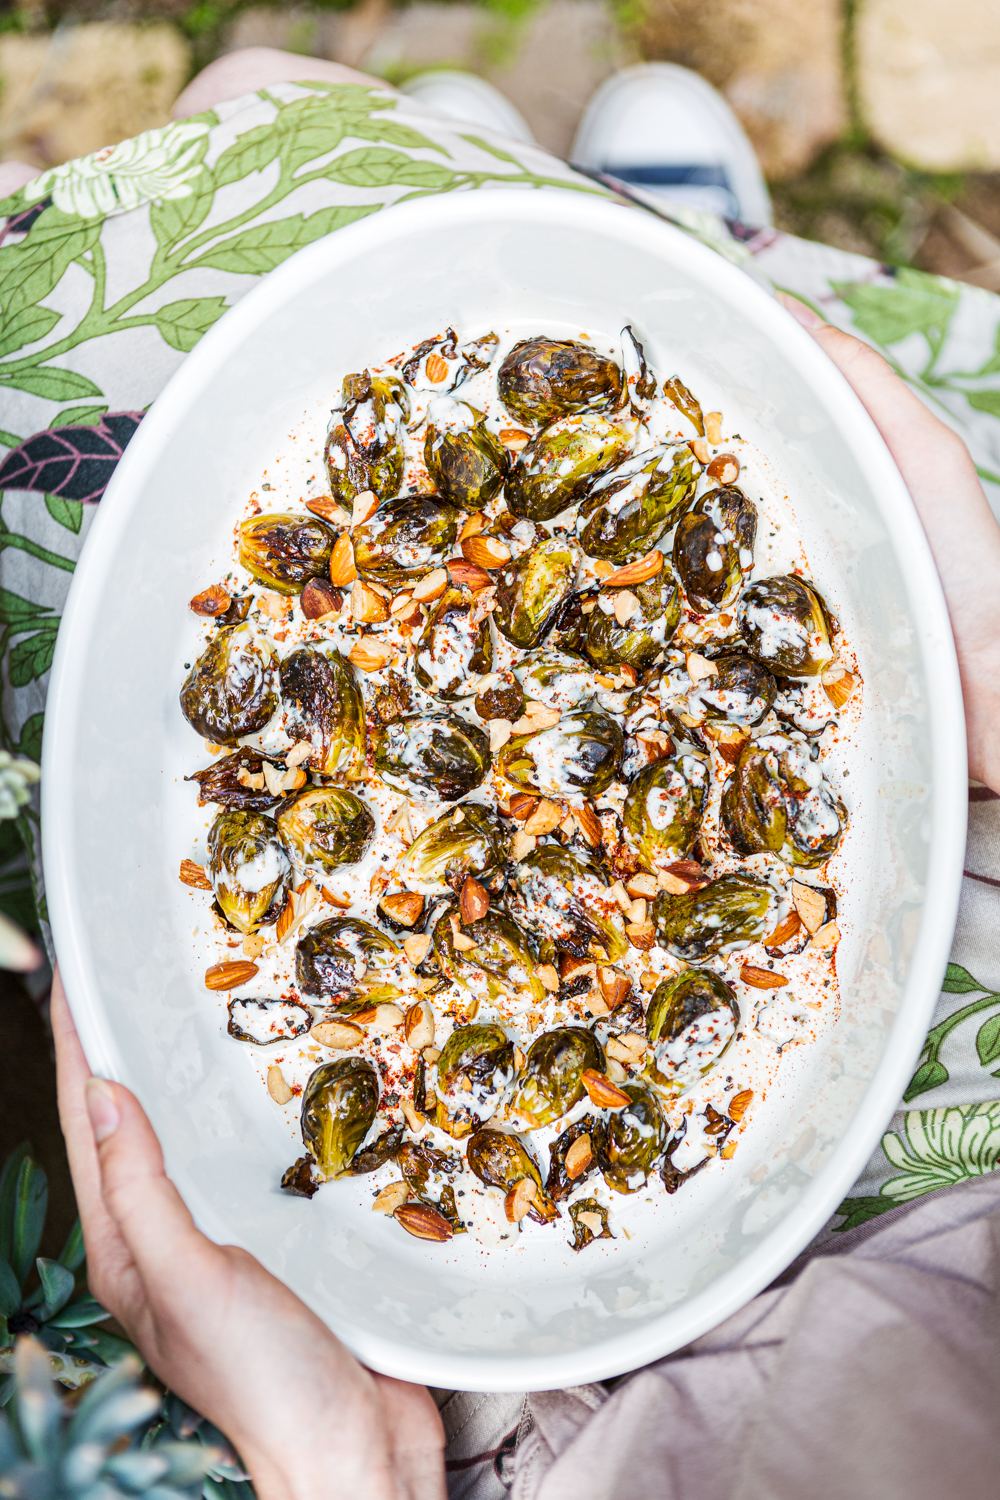 Roasted Brussels Sprouts, Simple Healing Food by Quirky Cooking